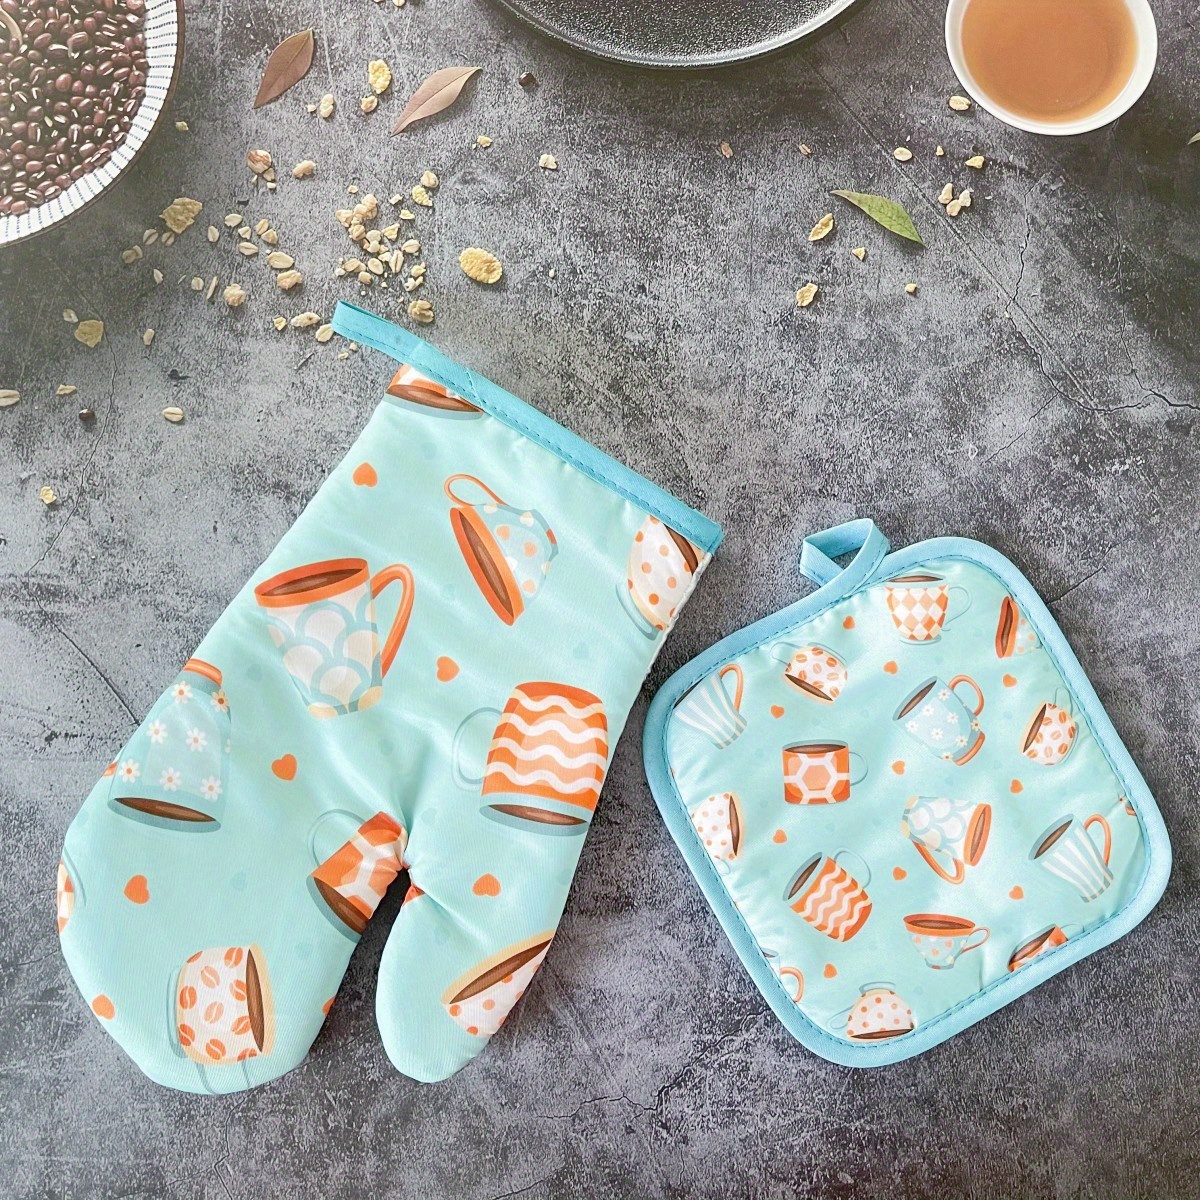 Cute Oven Mitts and Pot Pad Sets Non-Slip Potholders Kitchen Heat Resistant  Cute Heat Resistant Non-Slip Potholders Kitchen Heat Resistant Hot Pads Cute  Oven Mitts and Pot Pad Sets for Kitchen 1 